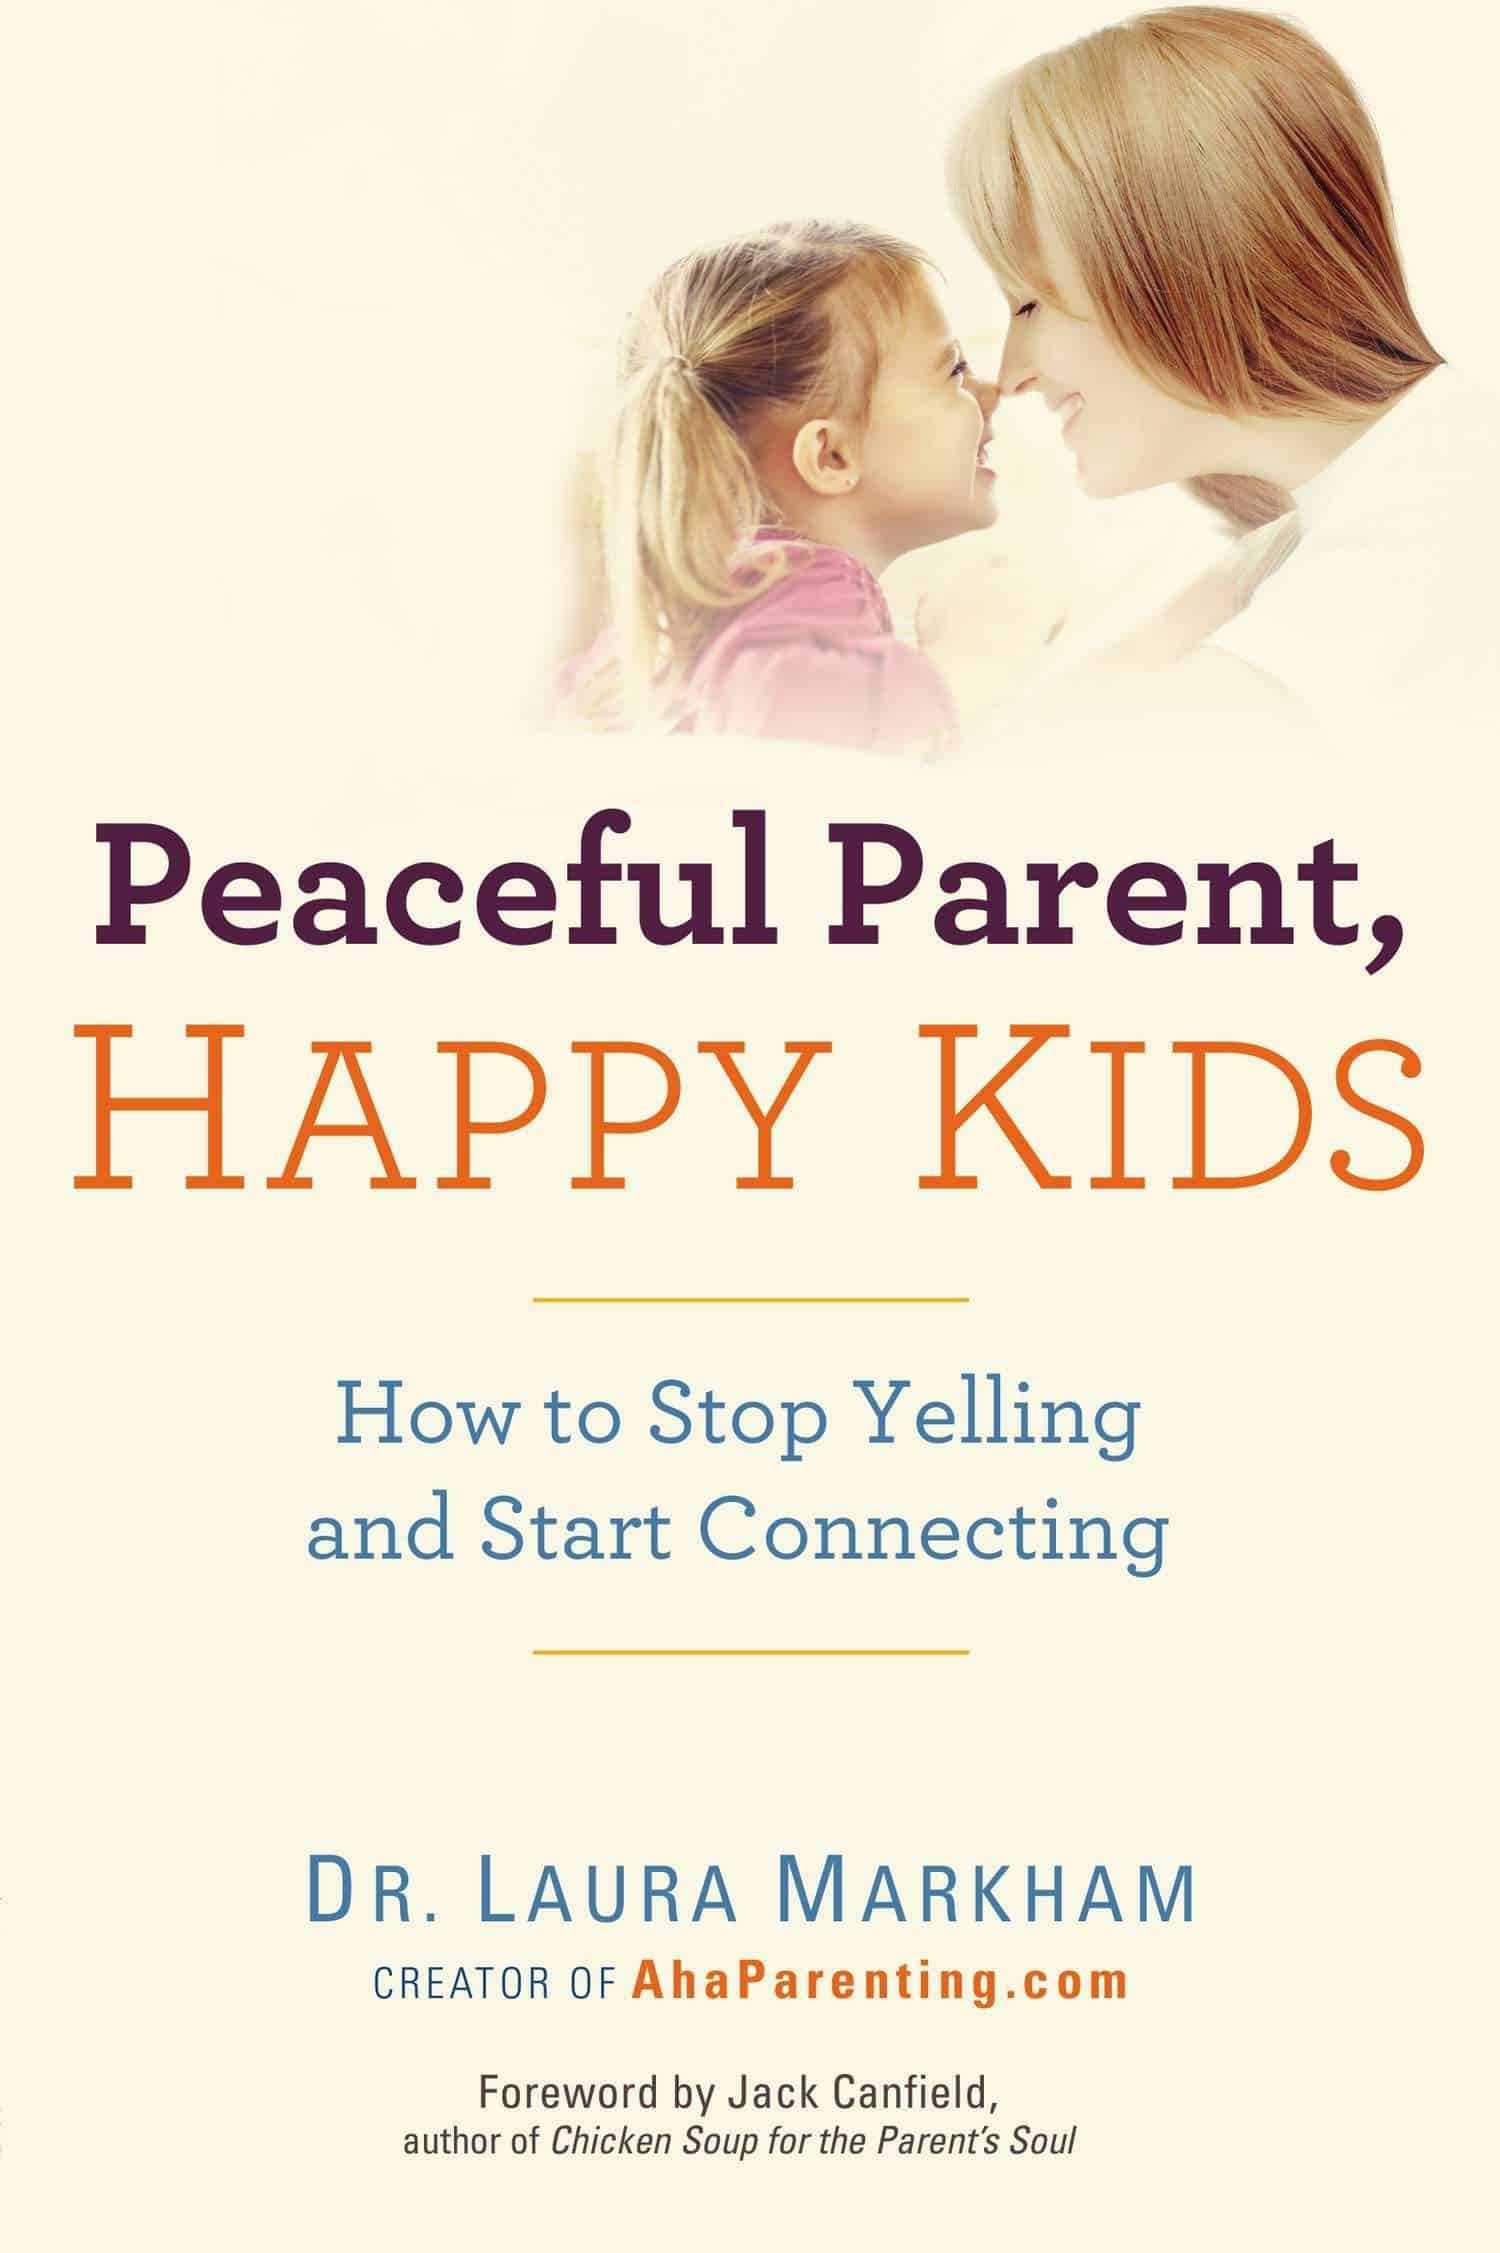 15 Insightful Parenting Books That Help Your Kids Start off a Healthy Life